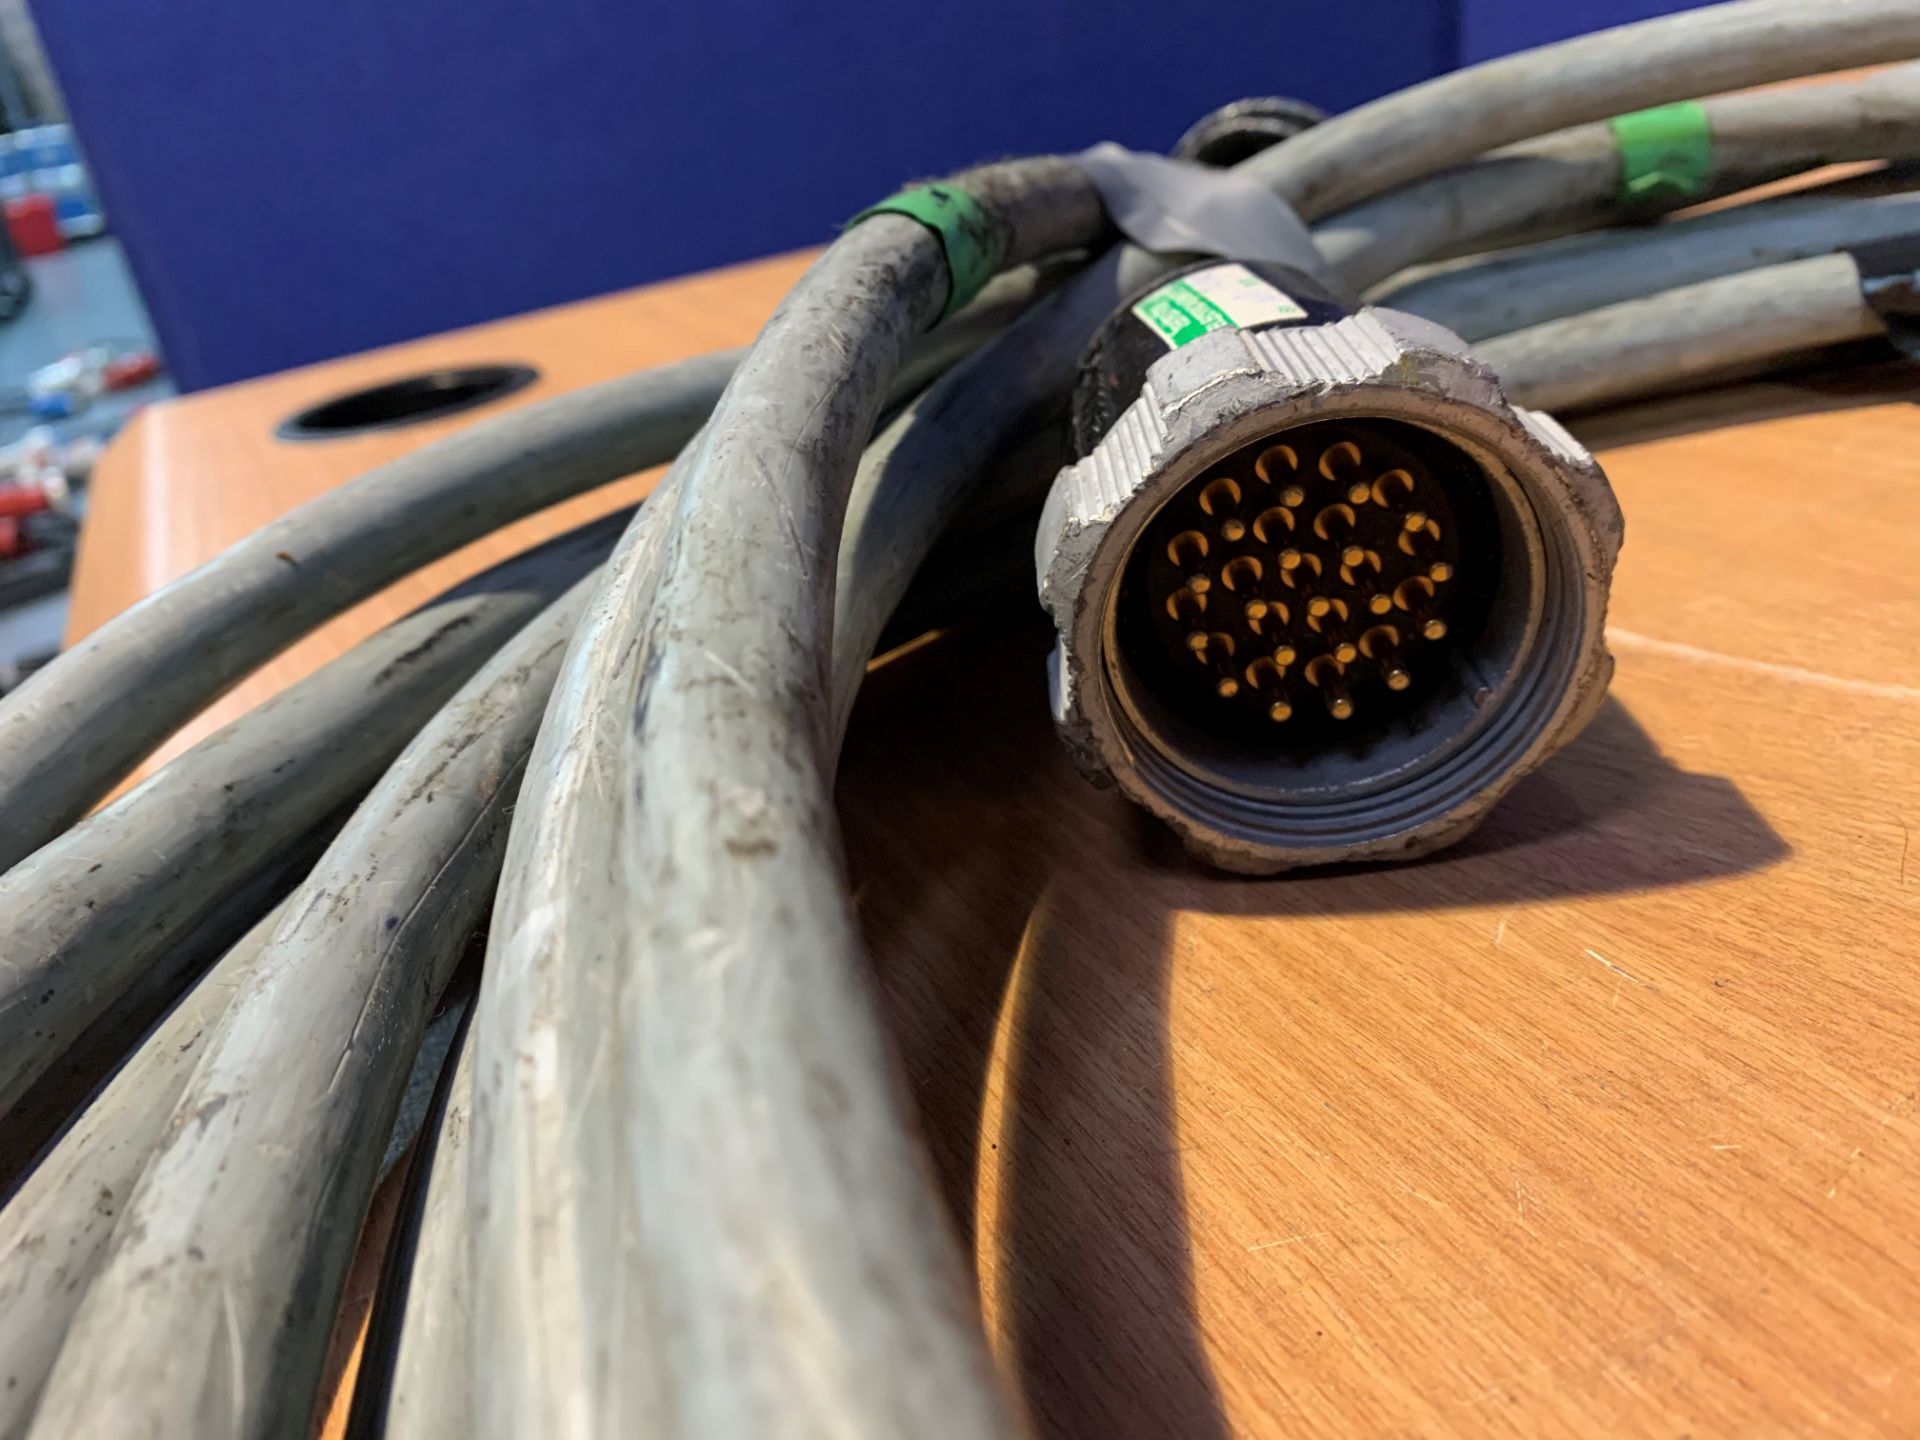 20m Socapex Cable - Image 3 of 4